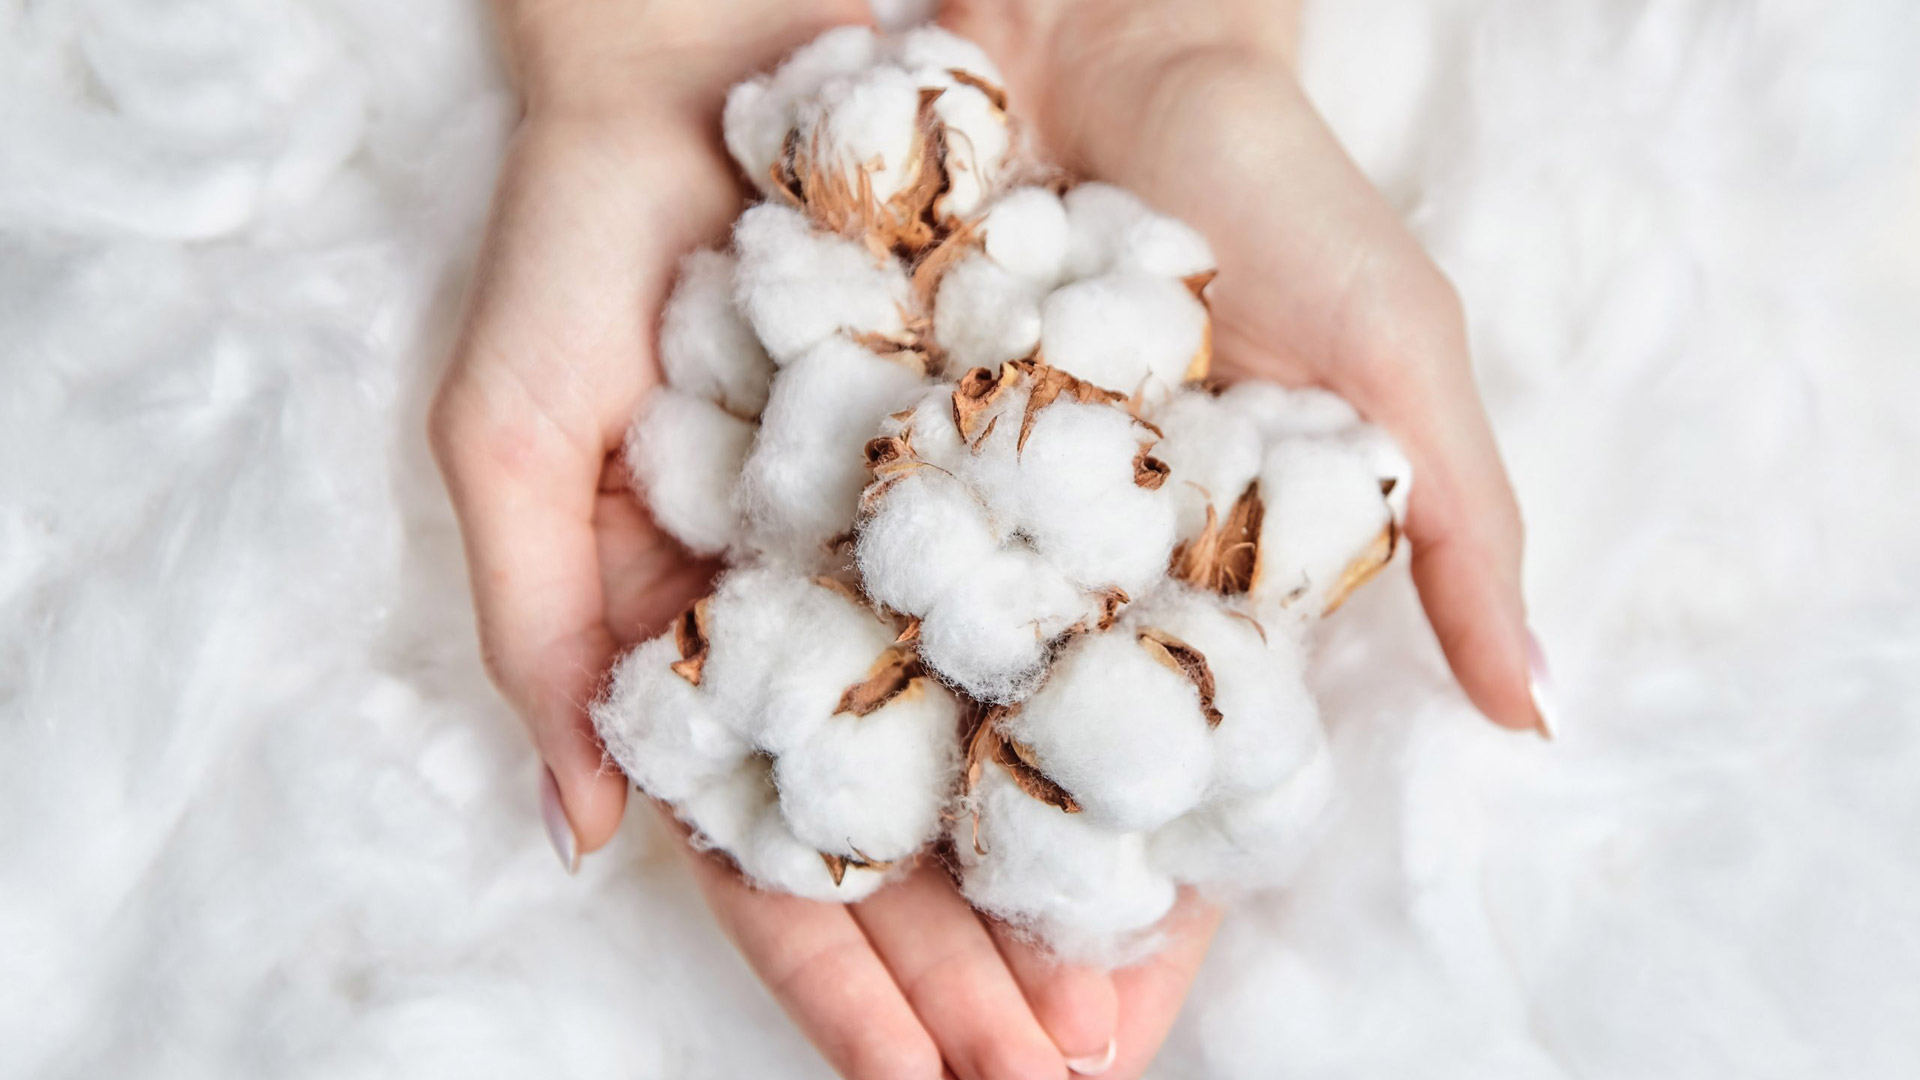 By choosing eco-friendly cotton products, consumers can support sustainable agriculture, reduce exposure to harmful chemicals, and contribute to the preservation of biodiversity and ecosystems. Additionally, eco-friendly cotton initiatives often promote social welfare by empowering farmers and supporting local communities.